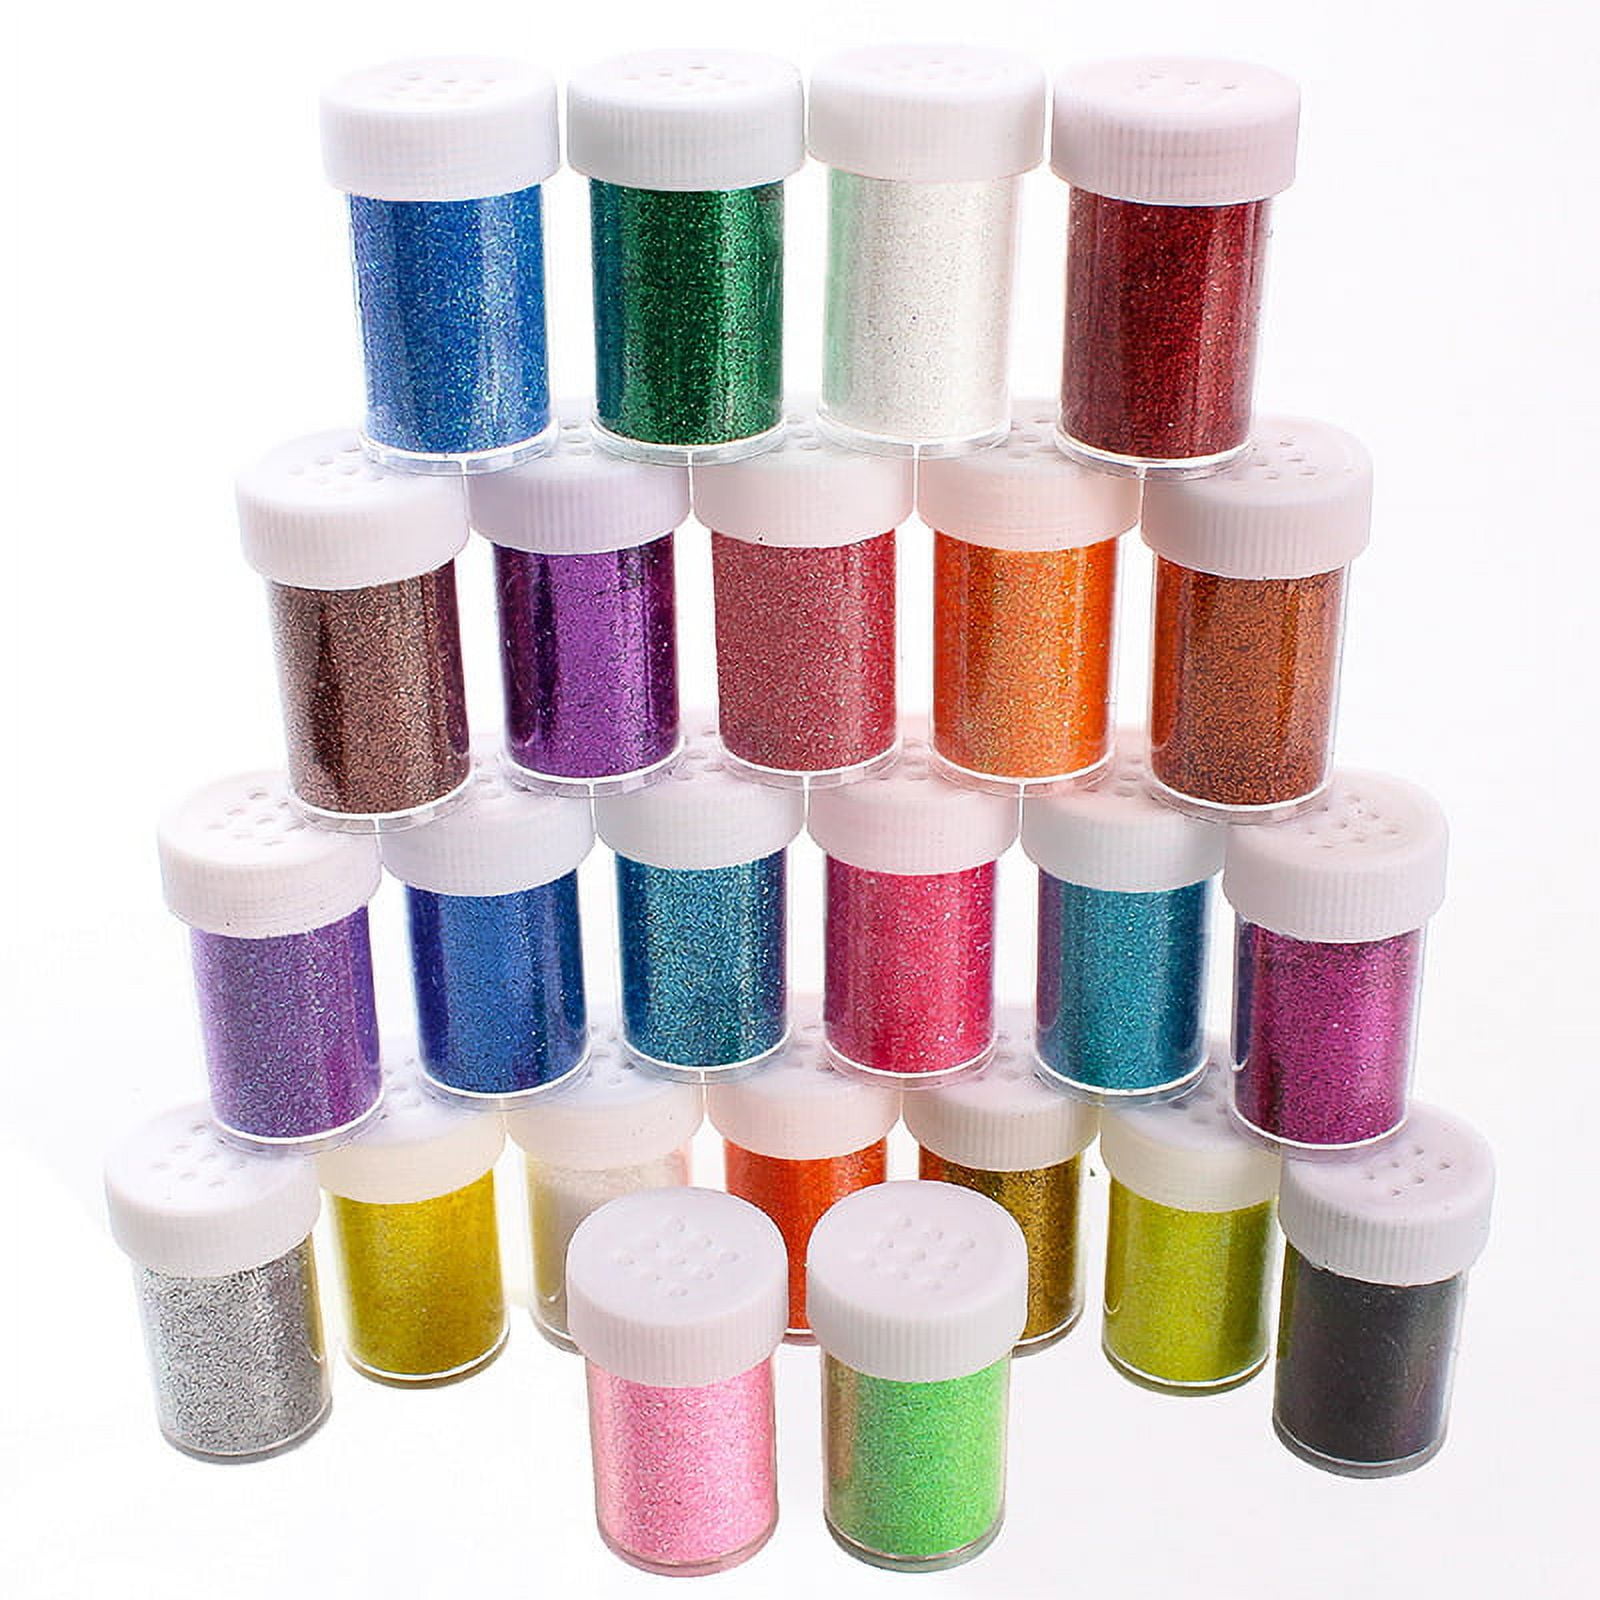 Glitter Shaker Jars, Variety Box Set of 50, Multipurpose Arts & Crafts Glitter, Extra Fine Glitter & Additional Assorted Shapes by Better Office